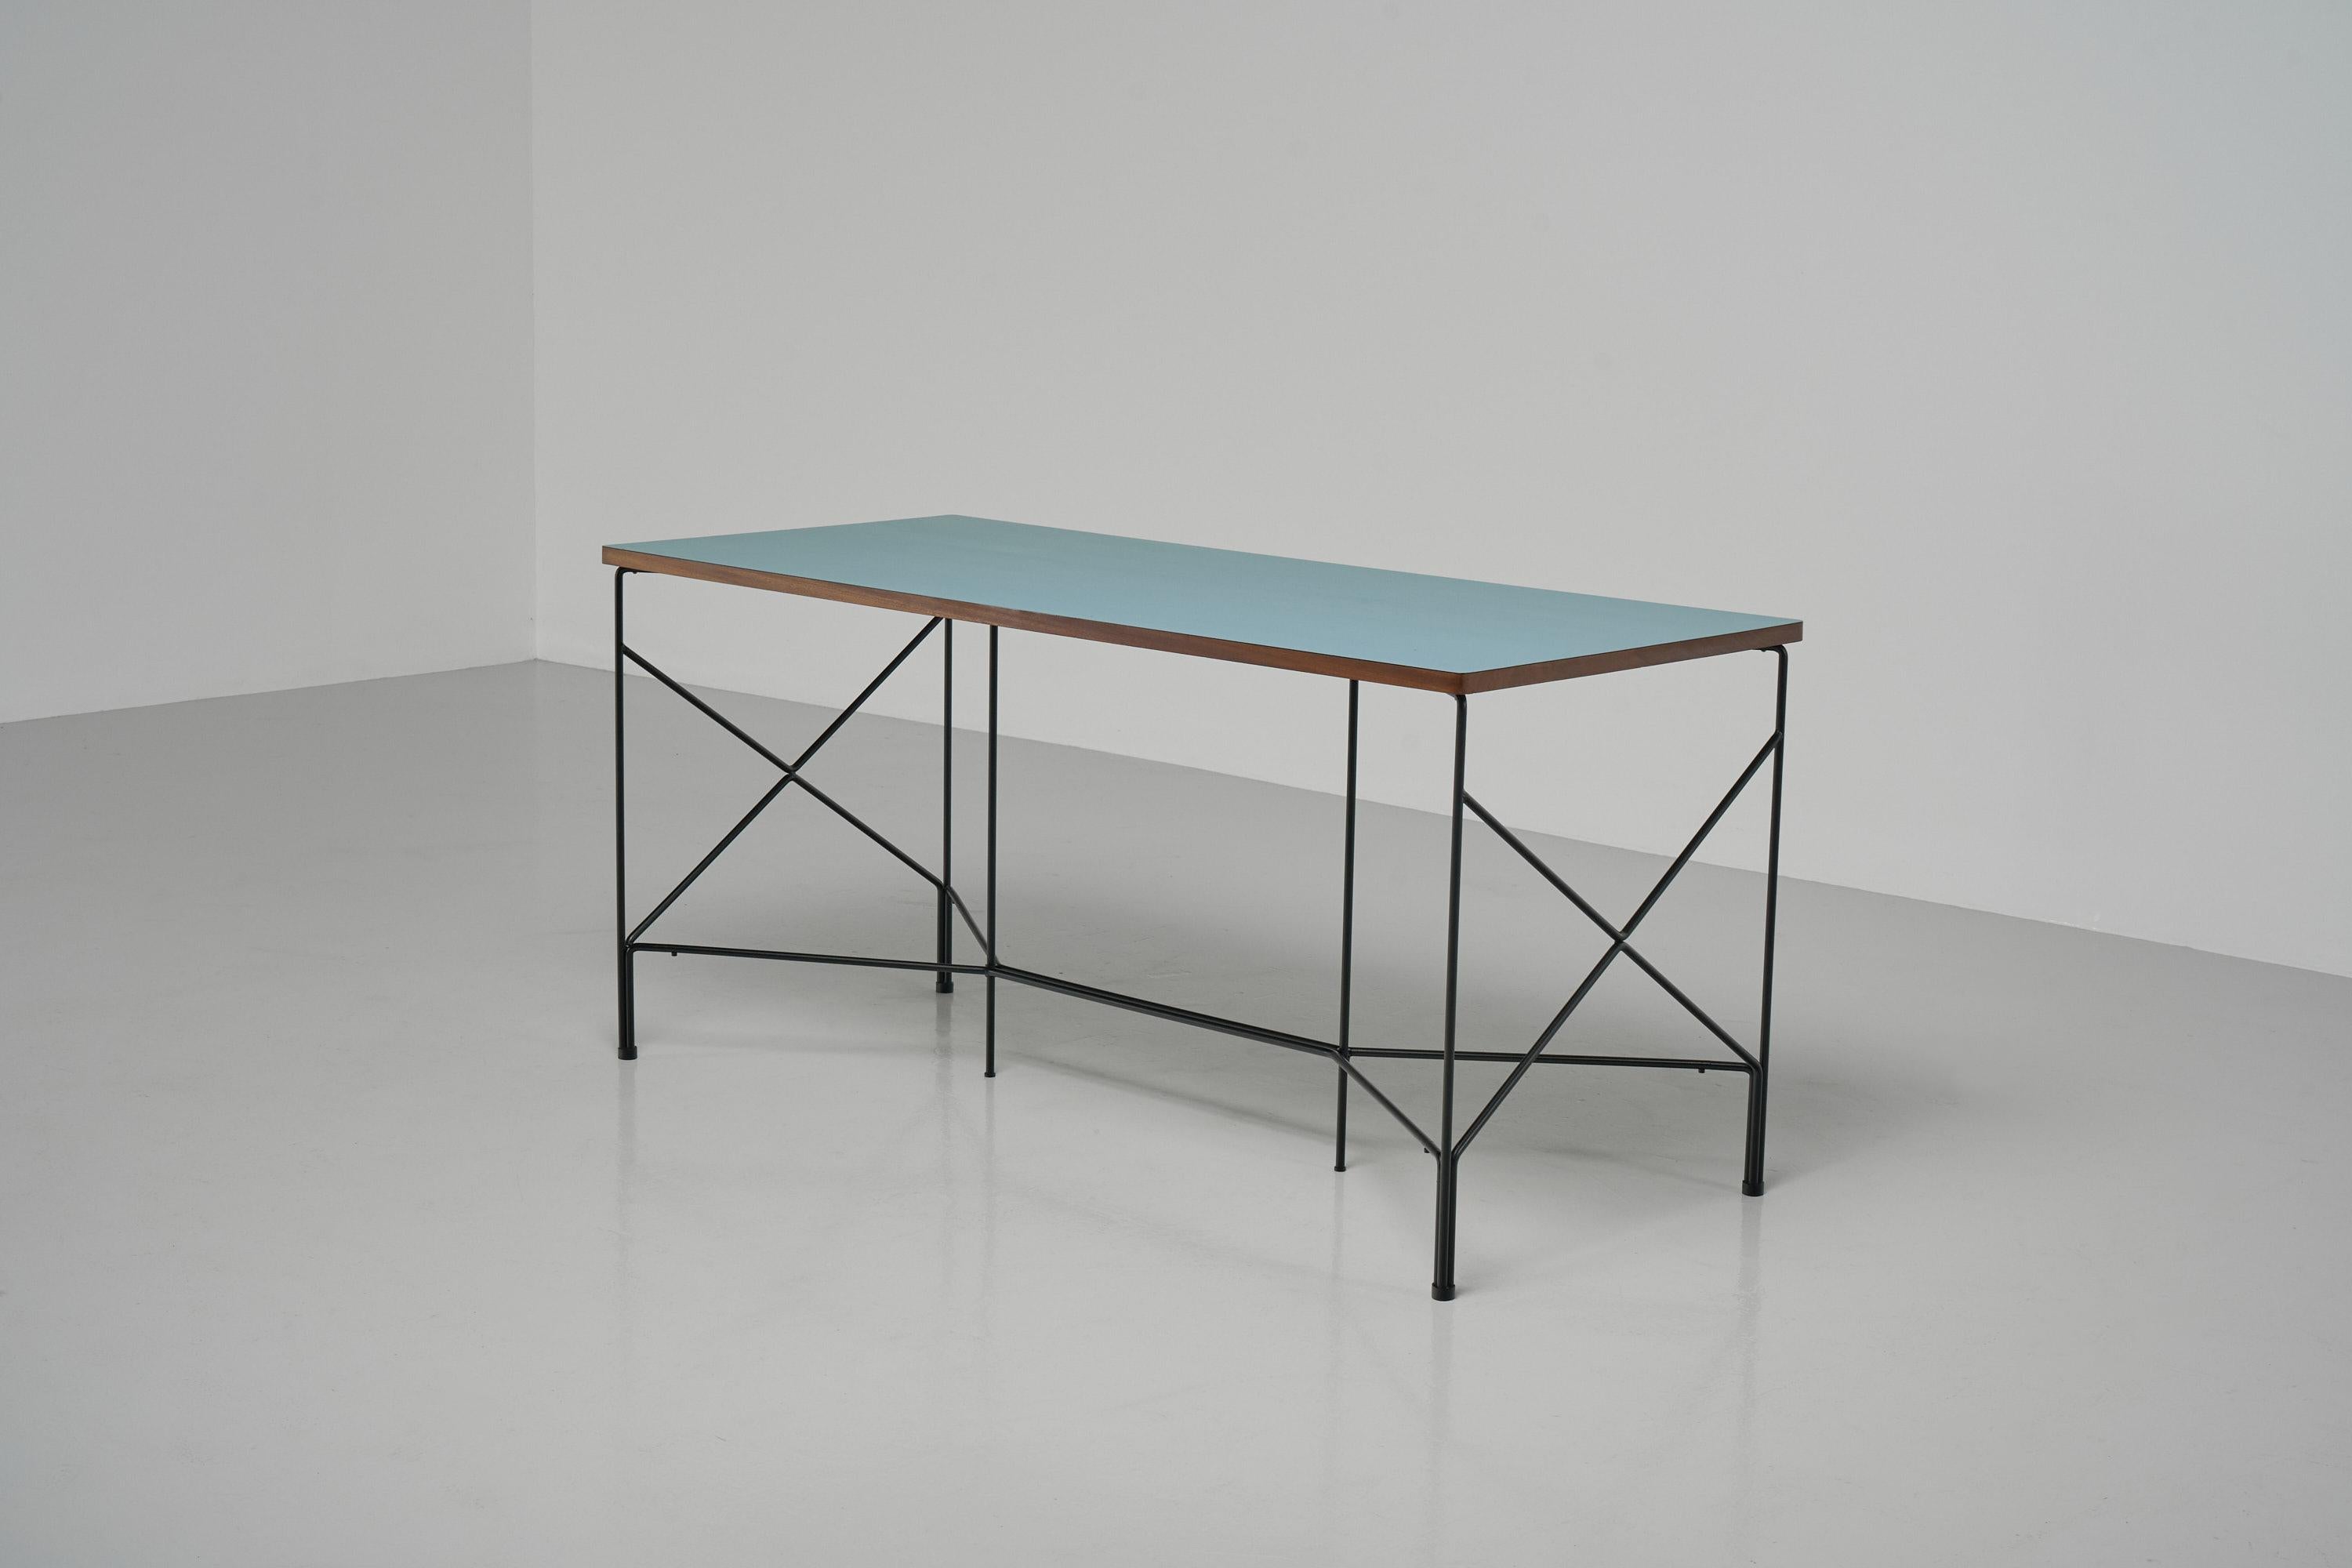 Rare and collectible desk designed by A.R.P. (Atelier de Recherches Plastiques) and manufactured by Minvielle, France 1955. Studio A.R.P. was an association between three talented designers; Pierre Guariche, Joseph-André Motte and Michel Mortier.